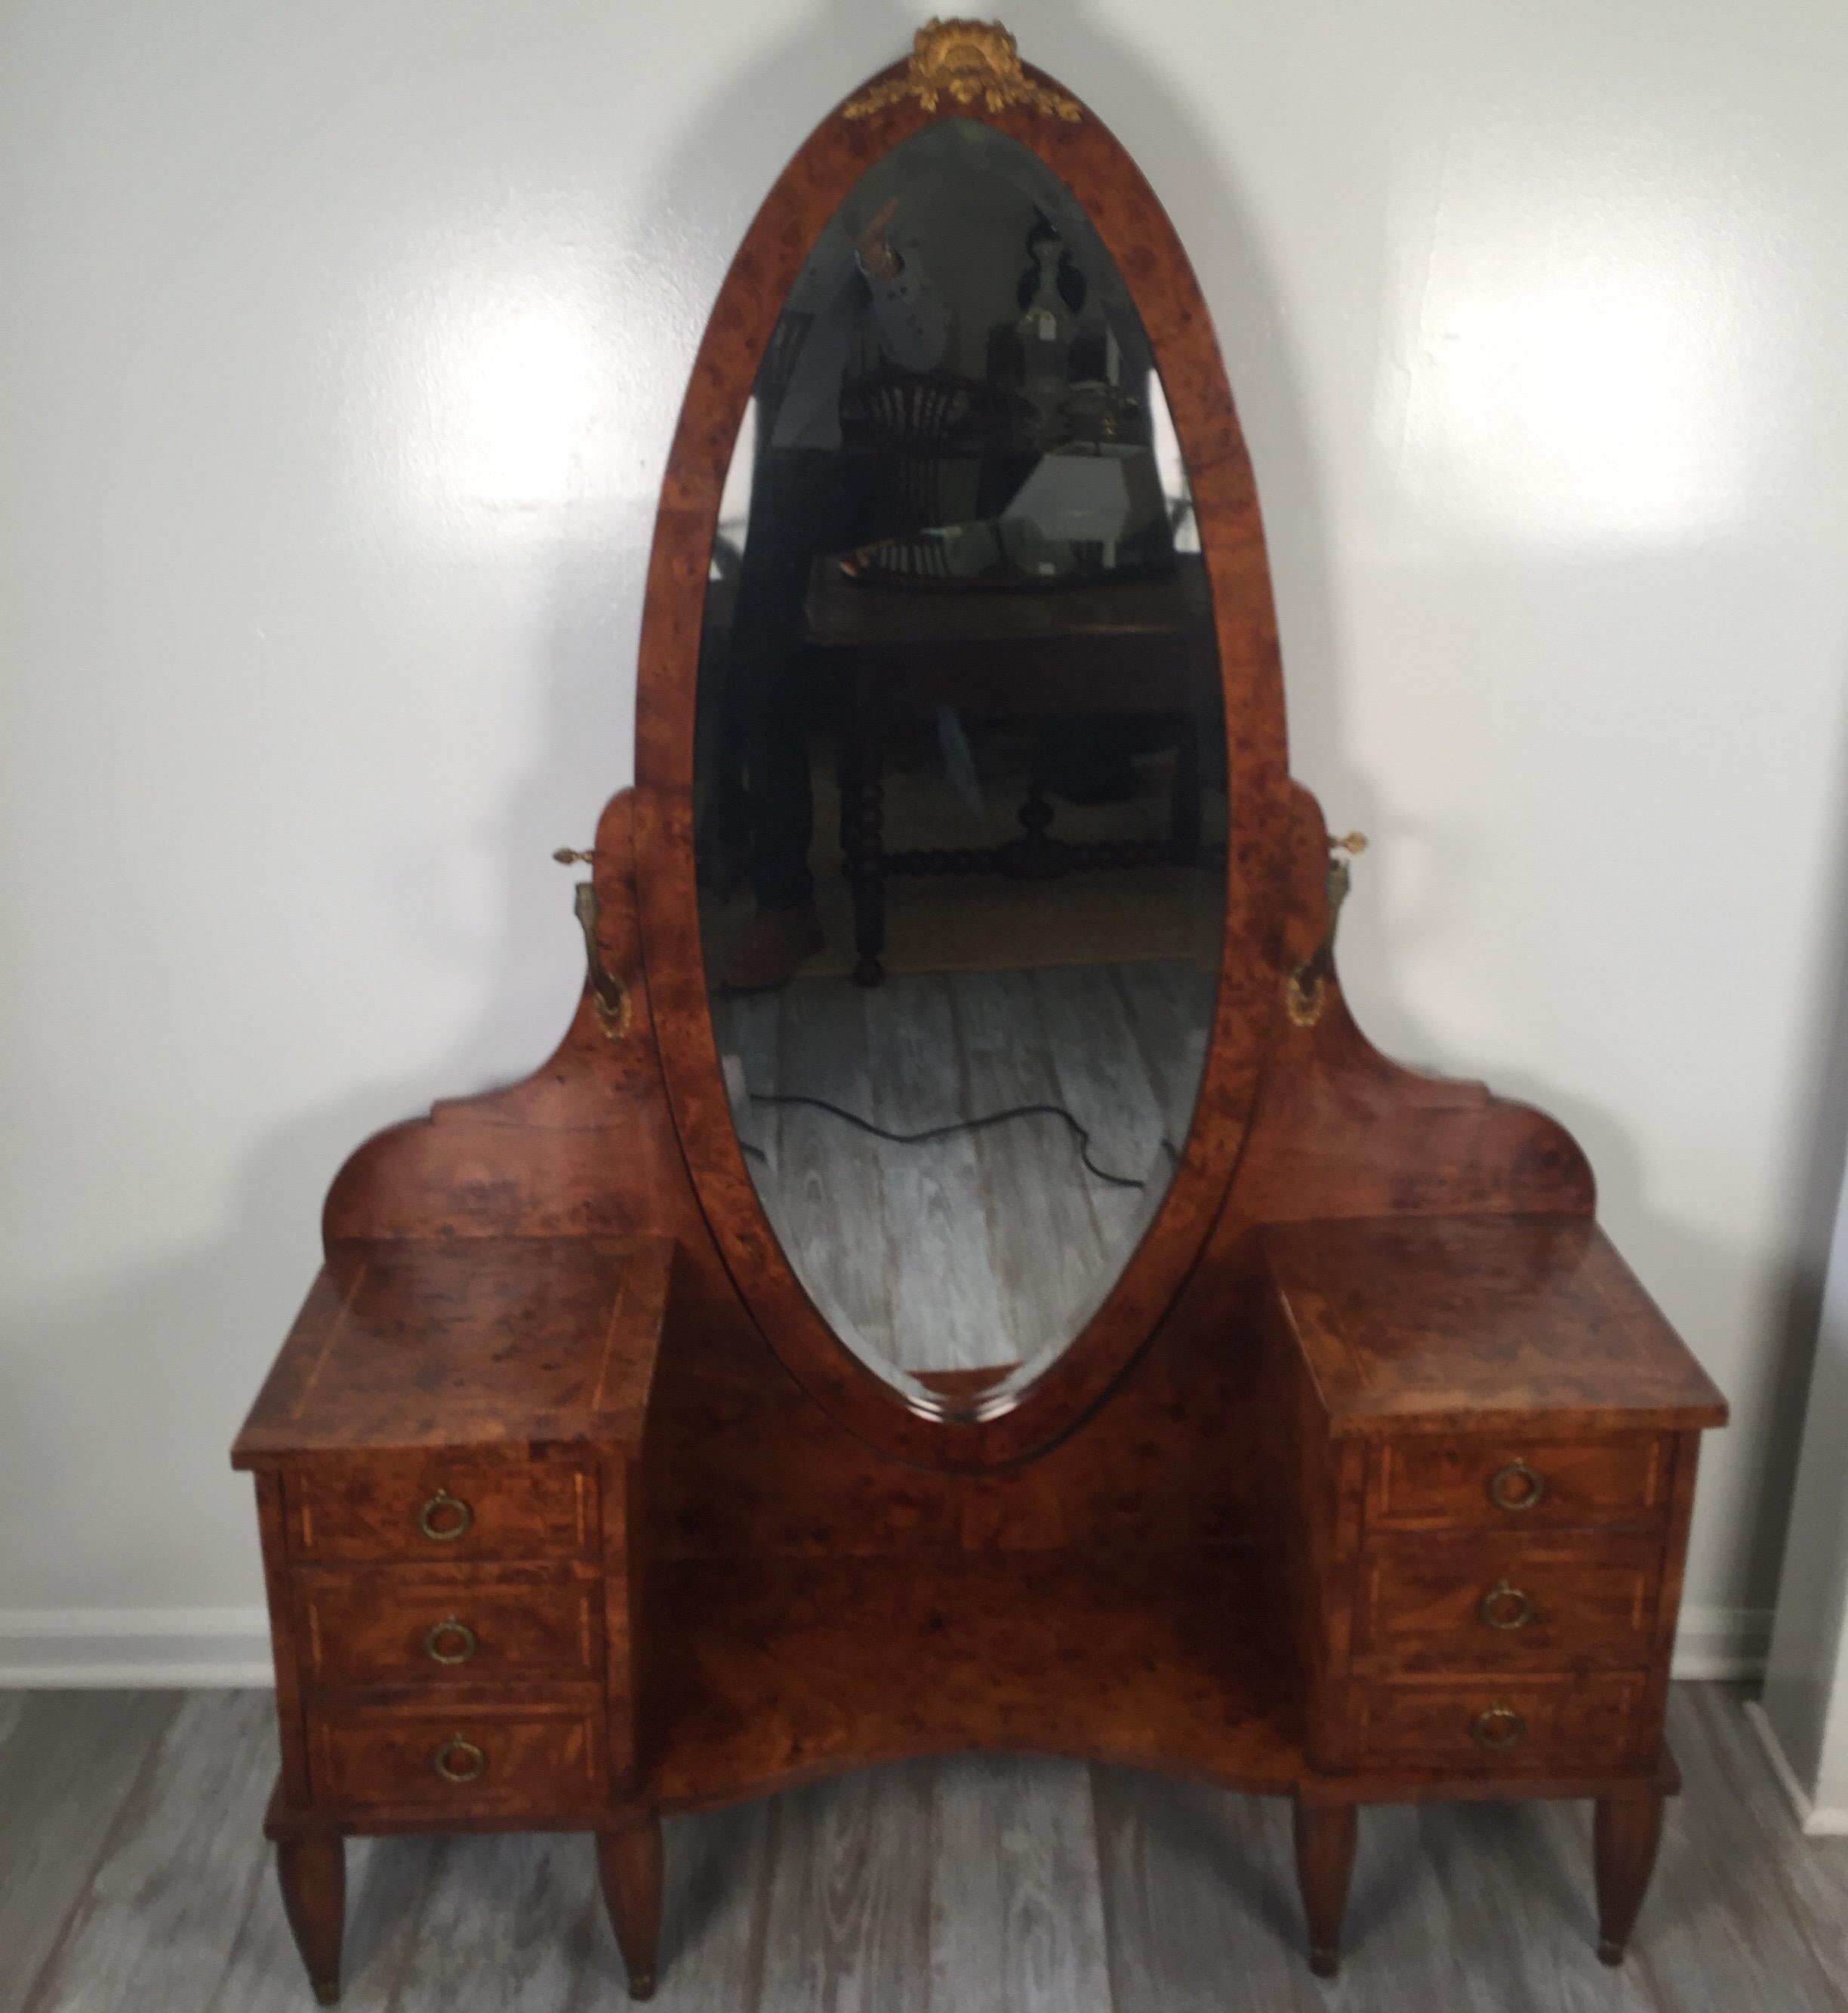 Graceful French burled walnut vanity with dramatic oval mirror. Three drawers on each side with gilt bronze ring handles. The beveled mirror with ormolu mount on top with a pair of small mounted electrified sconces one on each side.